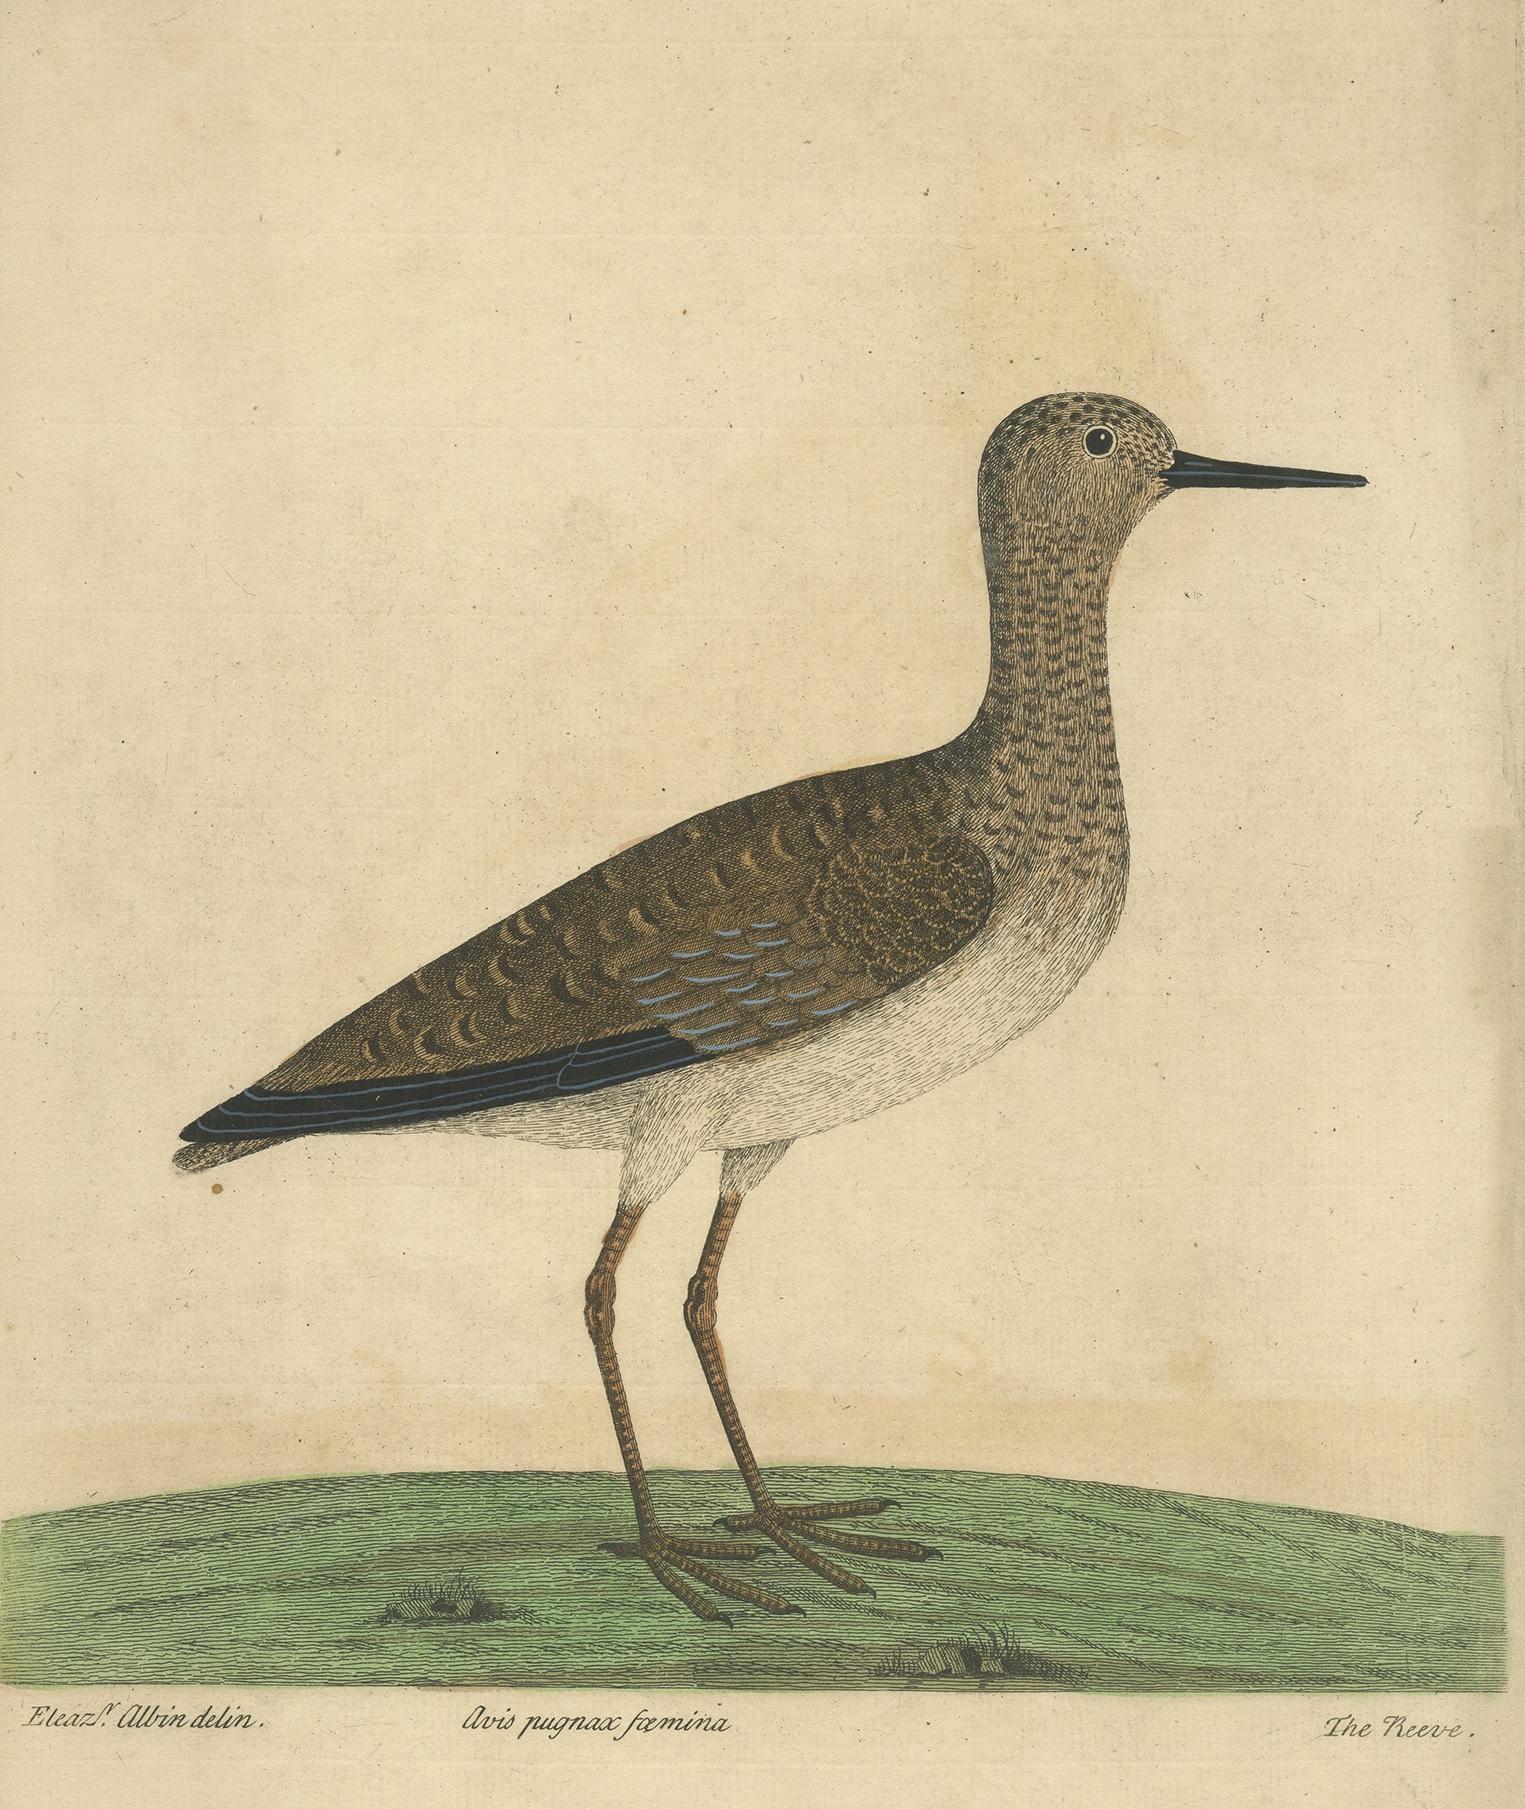 Antique print titled 'Avis pugnax foemina'. Old bird print of the ruff bird (Calidris pugnax), amedium-sized wading bird that breeds in marshes and wet meadows across northern Eurasia. This highly gregarious sandpiper is migratory and sometimes